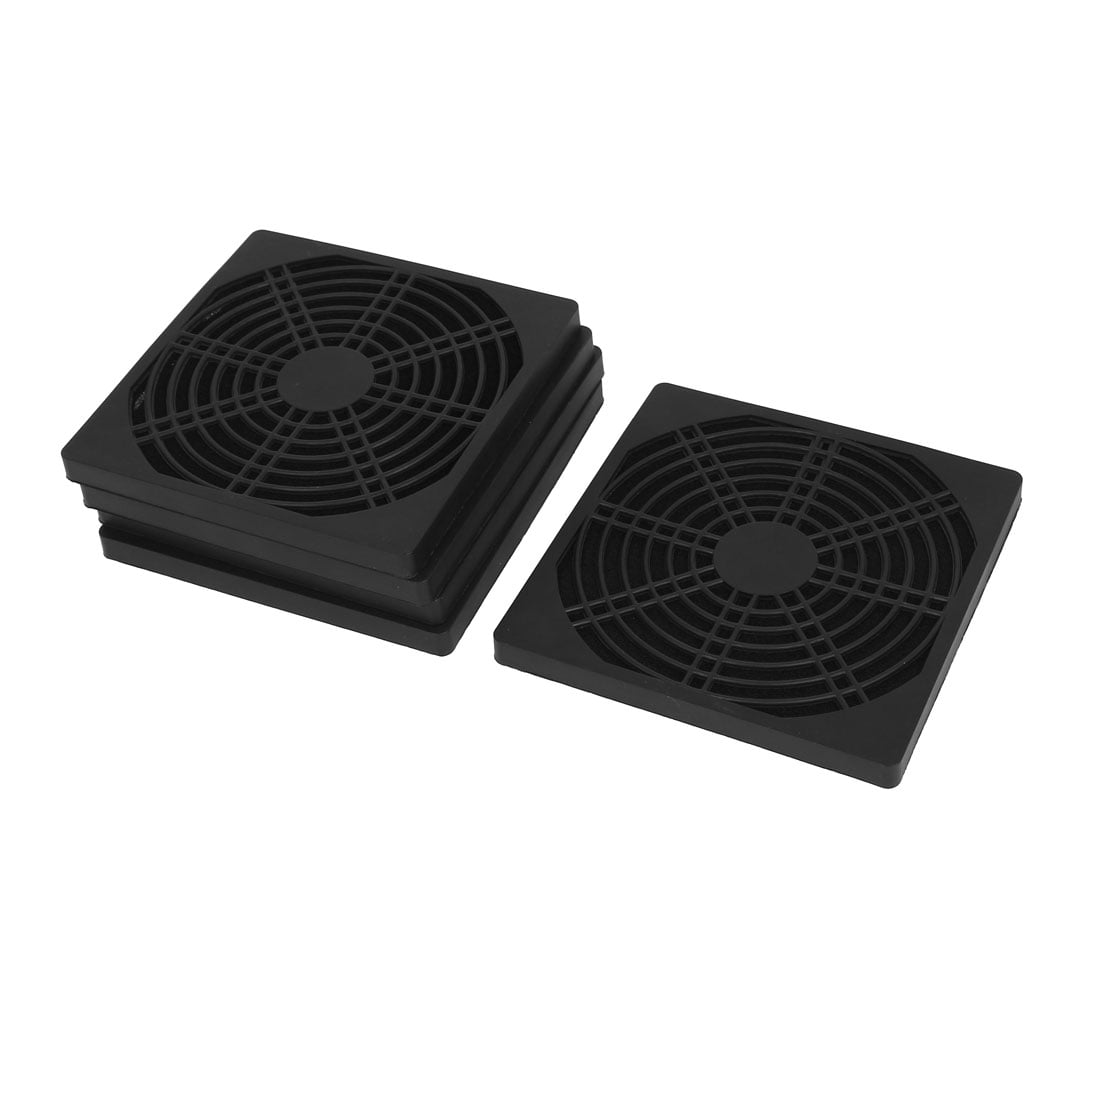 Dustproof 120mm Case Fan Dust Filter Guard Grill Protector Cover PC Computer Newest Arrival Computer Cooler Small Cooling Fan 